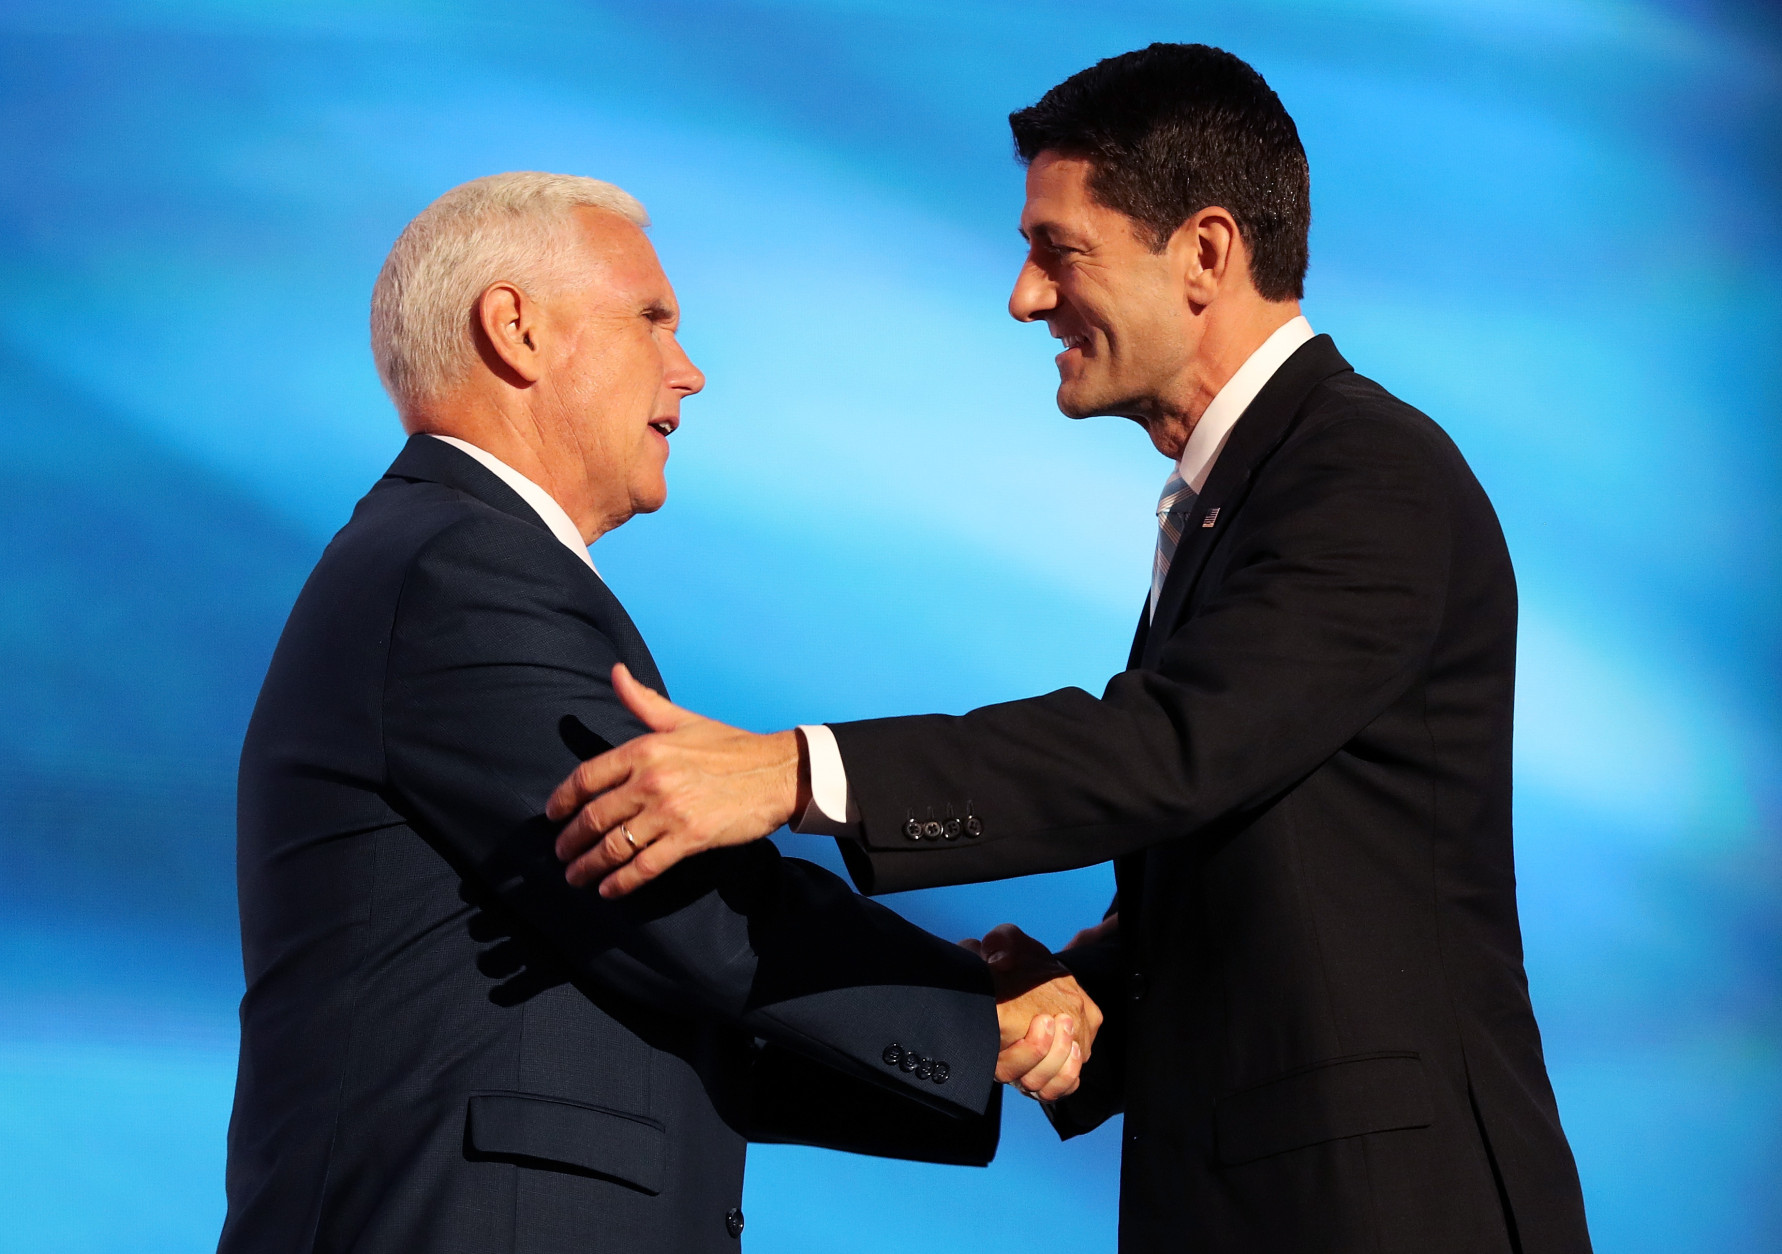 CLEVELAND, OH - JULY 20:  Speaker of the House Paul Ryan shakes the hand of Republican Vice Presidential candidate Mike Pence as he walks on stage to deliver a speech on the third day of the Republican National Convention on July 20, 2016 at the Quicken Loans Arena in Cleveland, Ohio. Republican presidential candidate Donald Trump received the number of votes needed to secure the party's nomination. An estimated 50,000 people are expected in Cleveland, including hundreds of protesters and members of the media. The four-day Republican National Convention kicked off on July 18.  (Photo by John Moore/Getty Images)